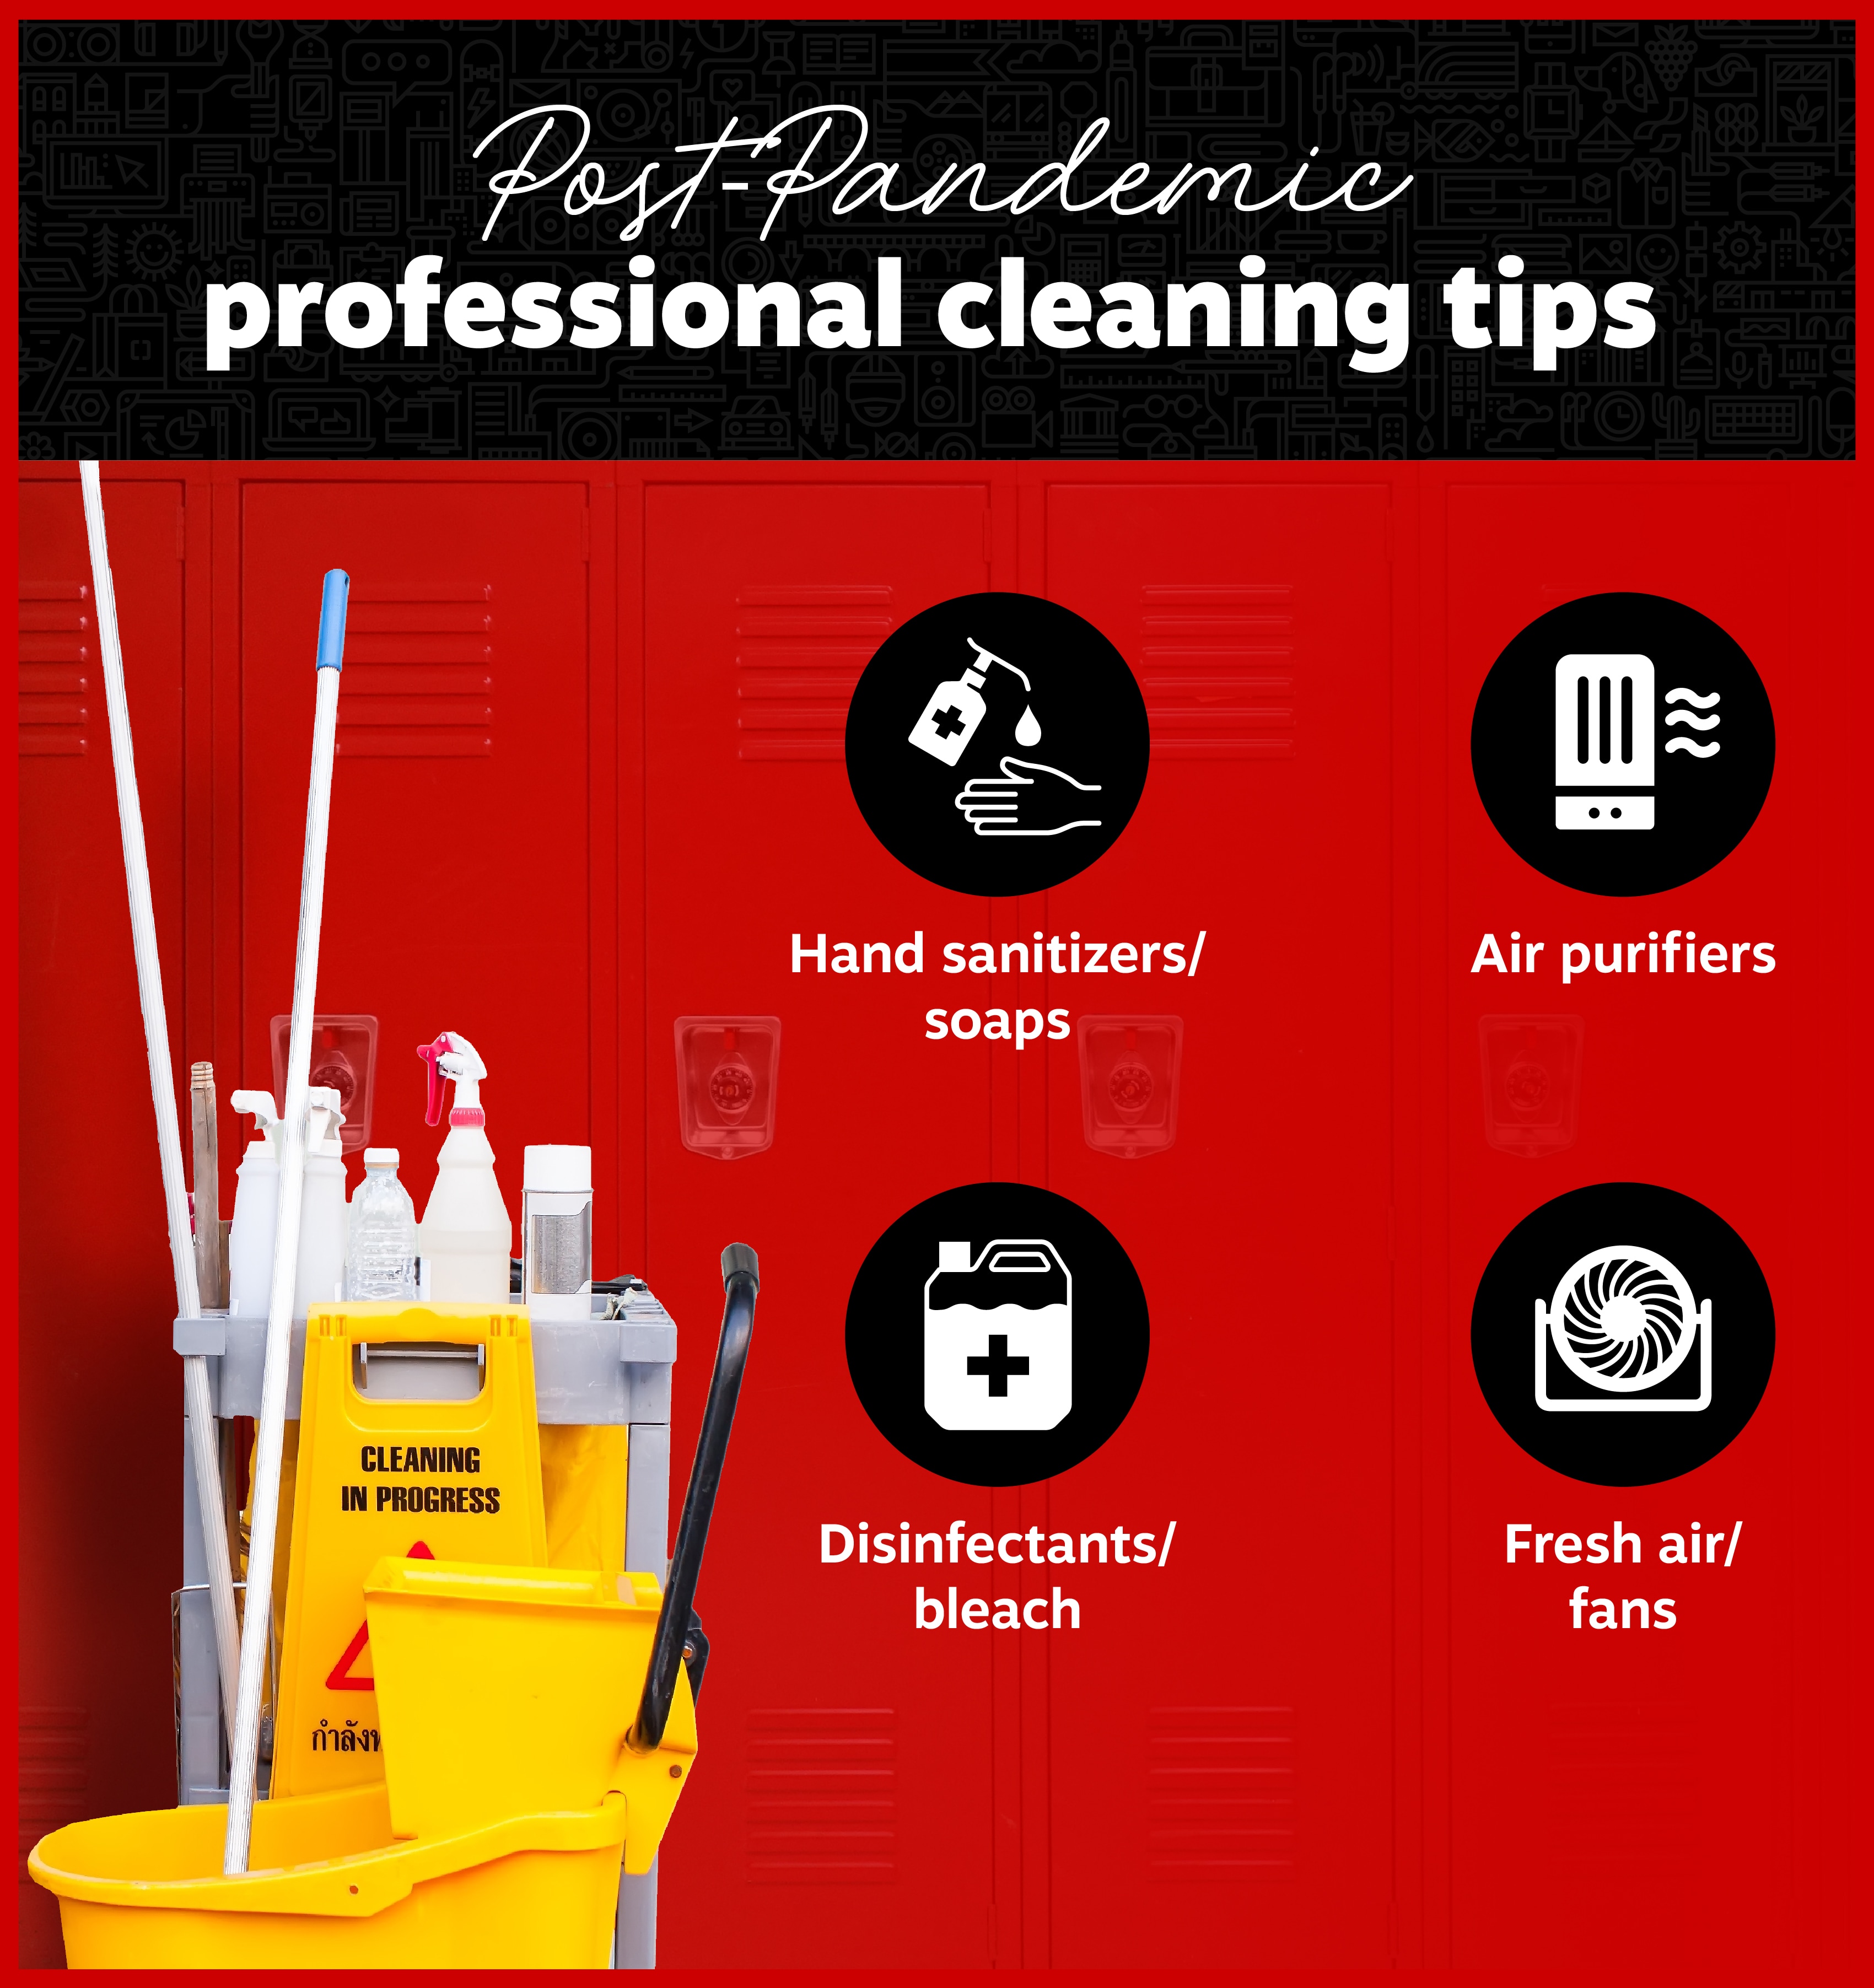 https://marketingassets.staples.com/m/1b73a3d67a3d7485/original/Commercial-Cleaning-Tips-for-Post-Pandemic-Life.jpg